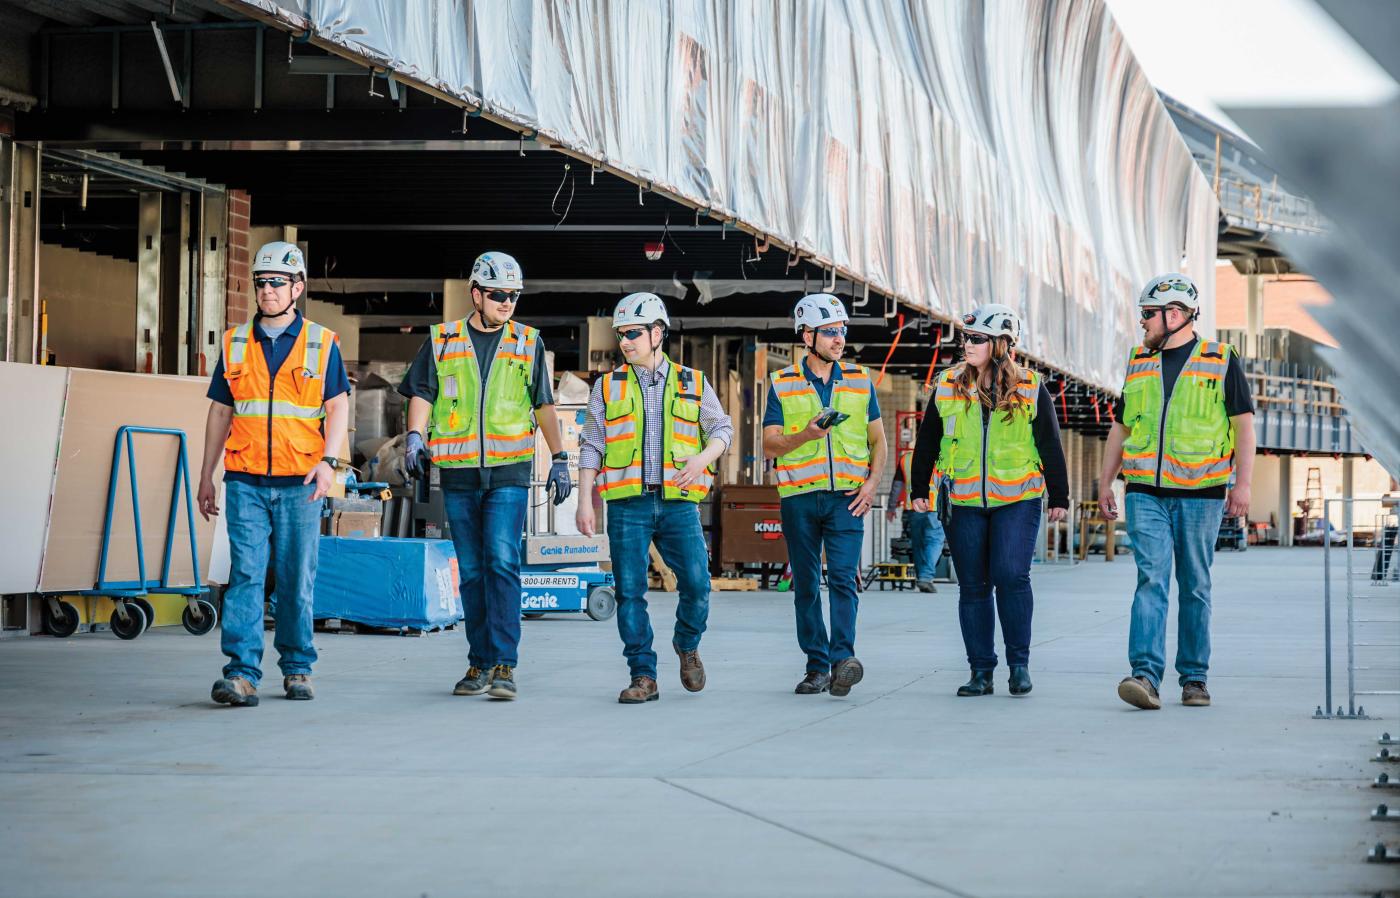 Civil Engineers in construction uniform walking together 